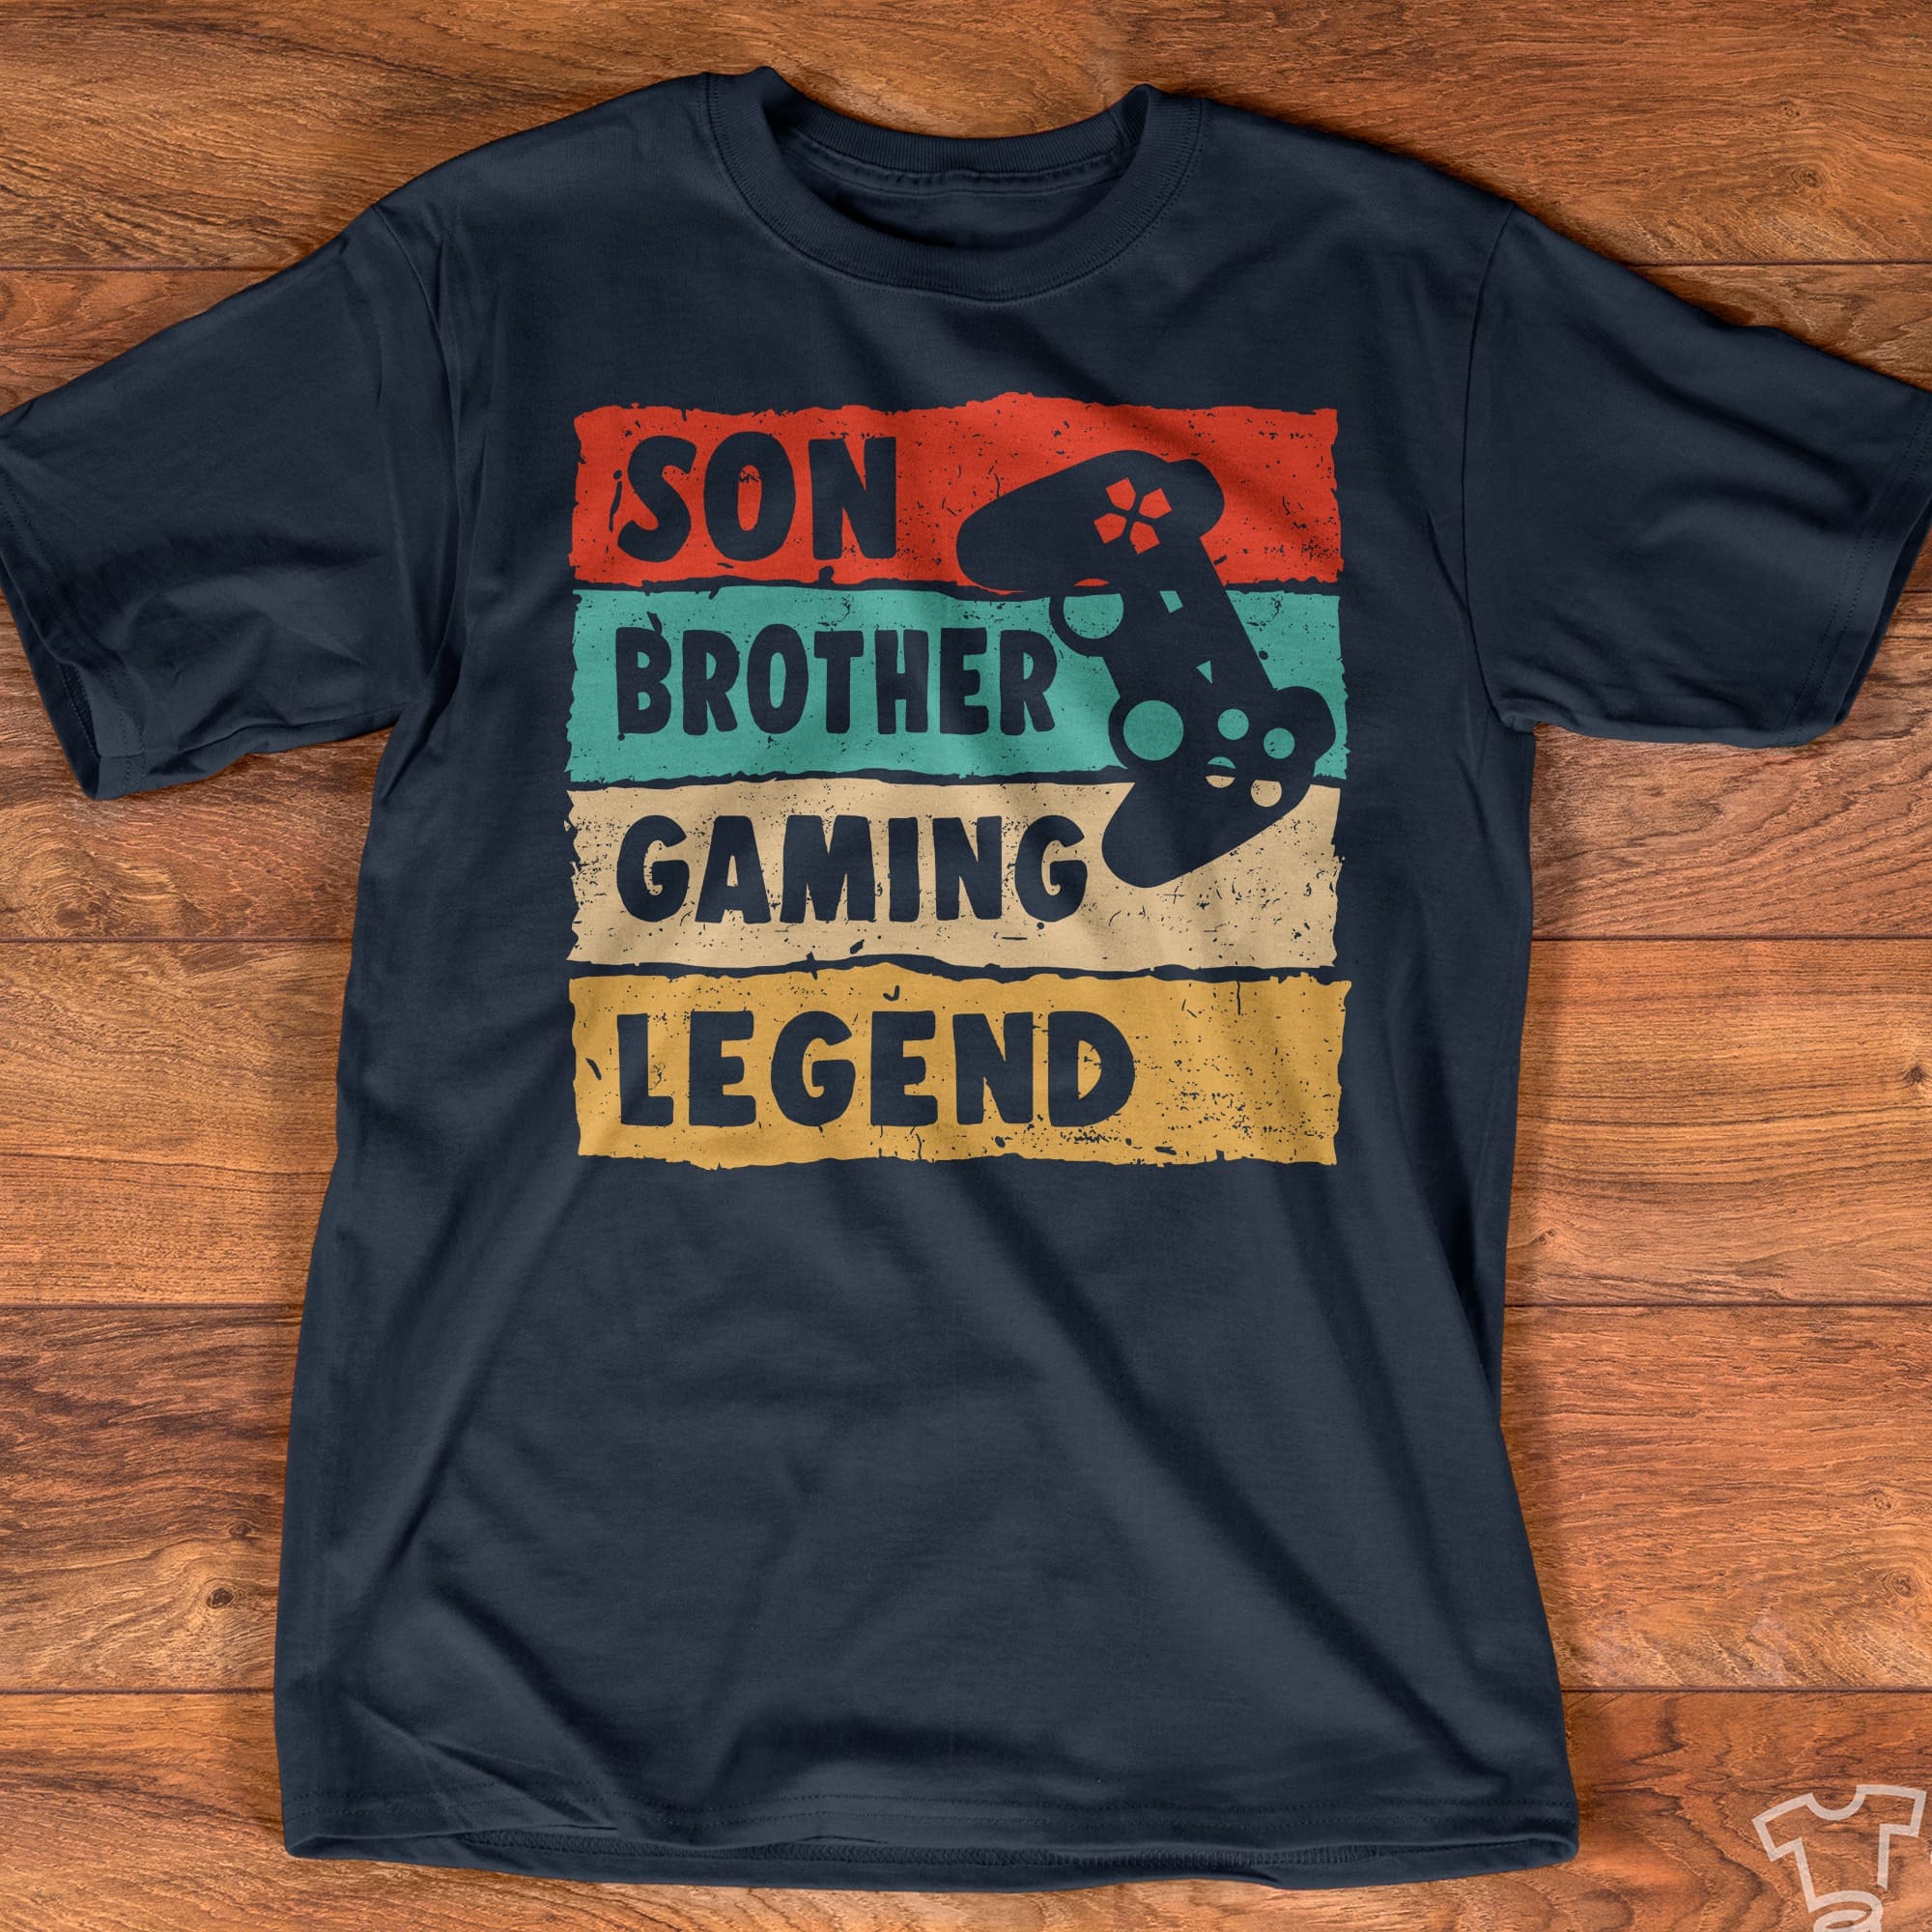 Son brother - Gaming legend, gift for gaming lover